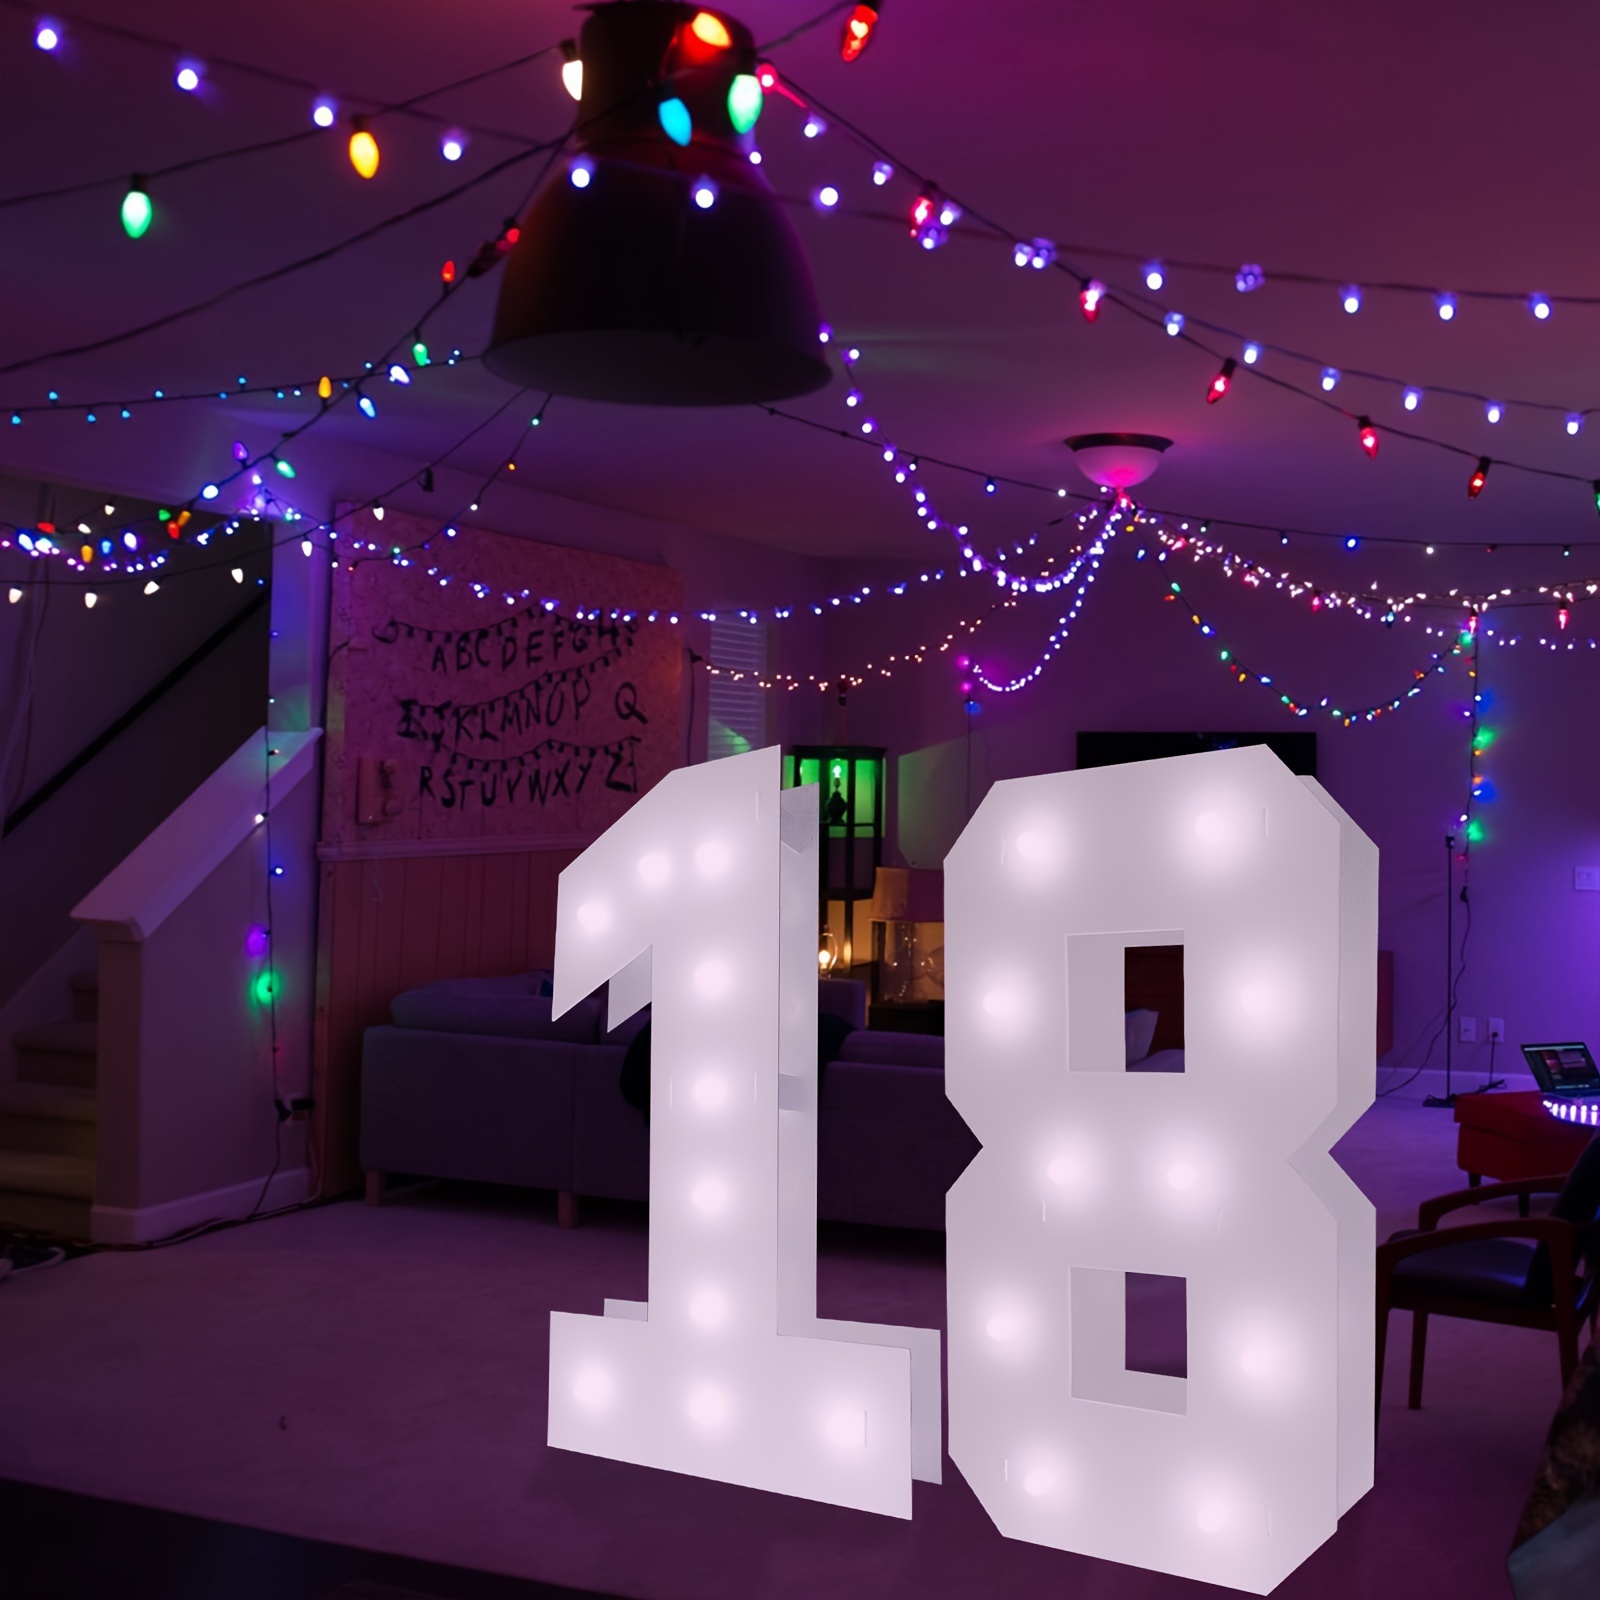 1pc, 4FT/48in/122cm Marquee Light Up Numbers, Party Decoration Large Marquee Light Up Letters, White Marquee Numbers For Birthday Party Wedding Anniversary Decorations, 0-9 Mosaic Cool White Glowing Numbers Frame